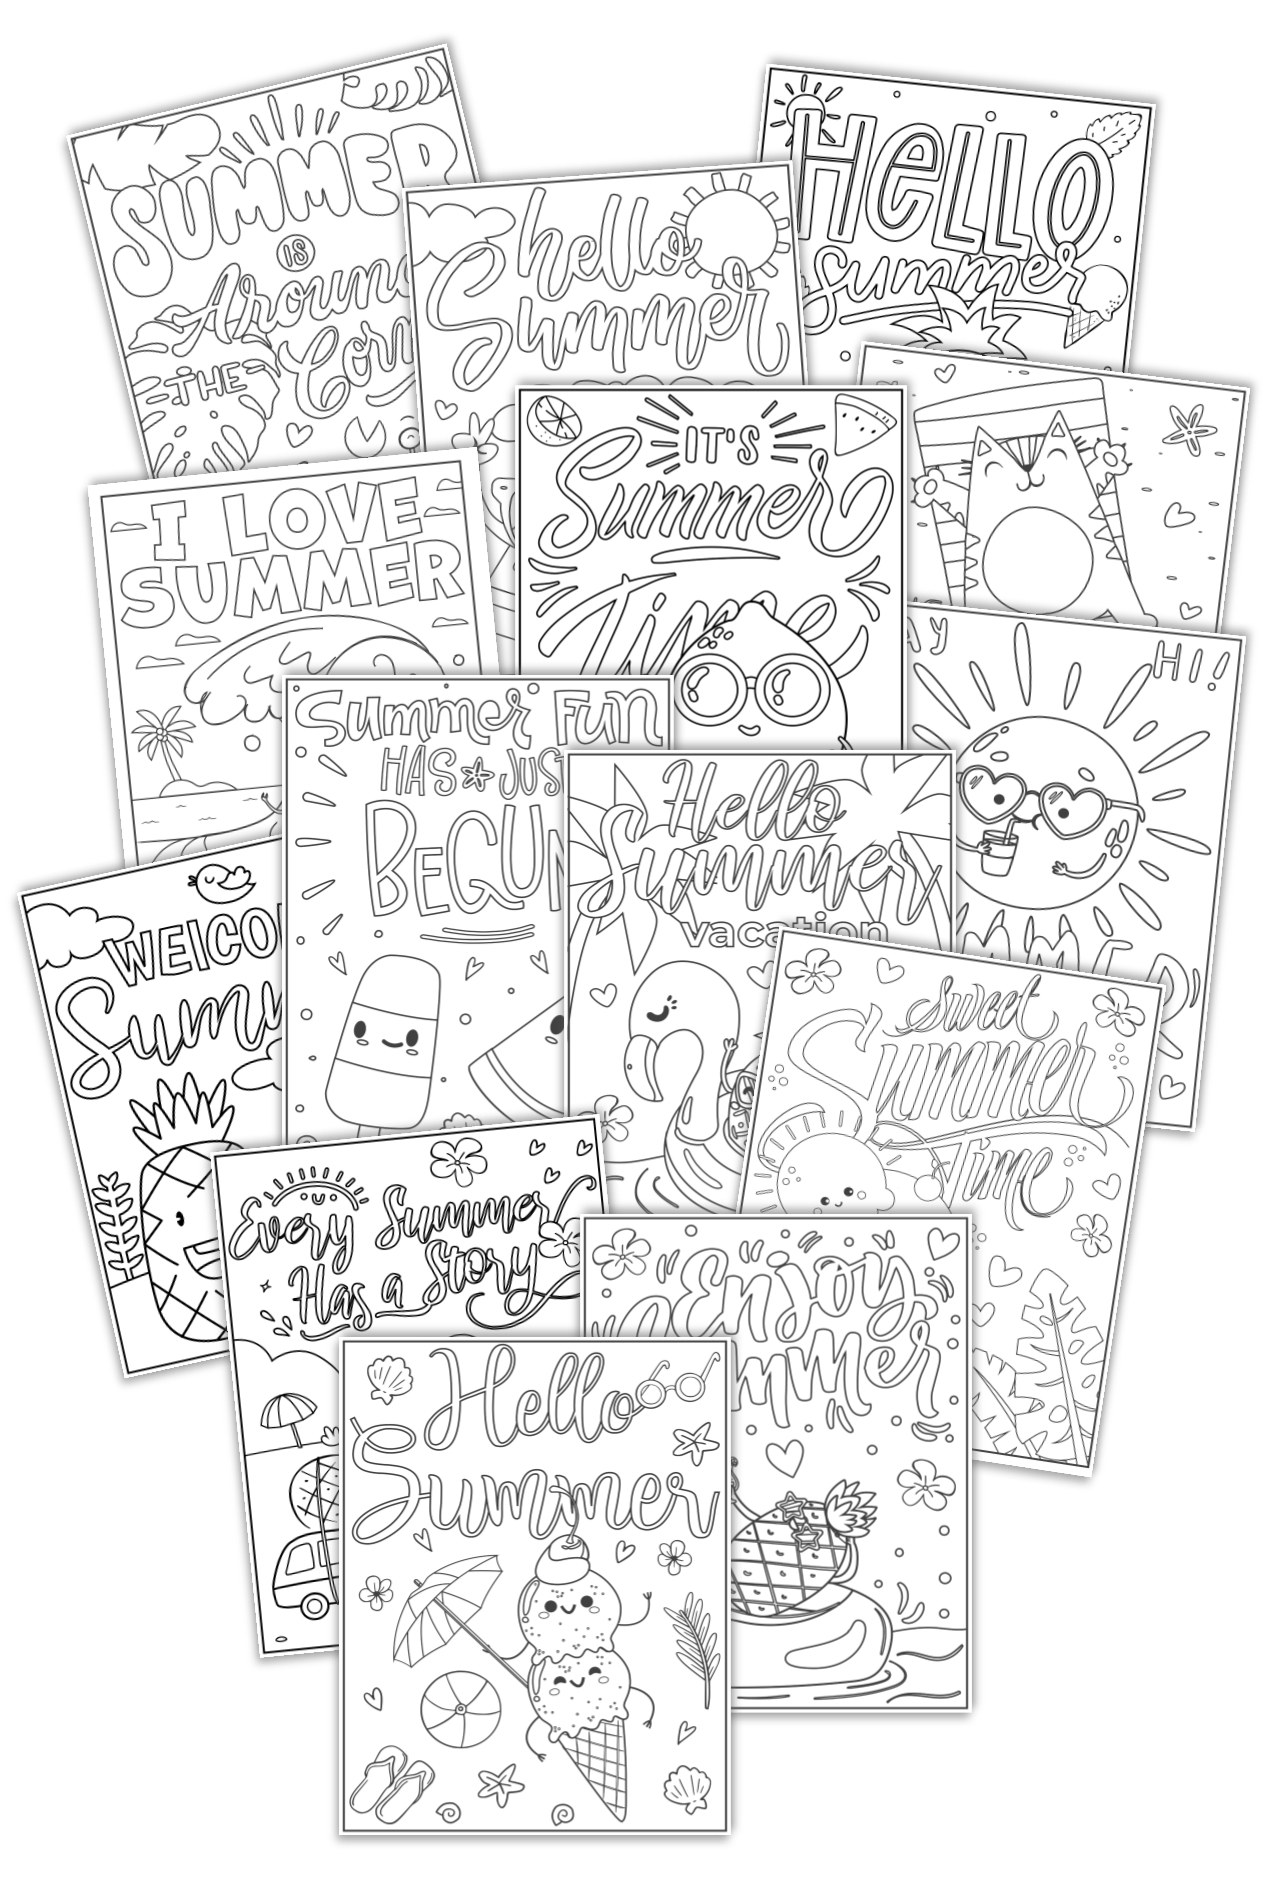 Summer fun coloring book pages â roaming willow designs